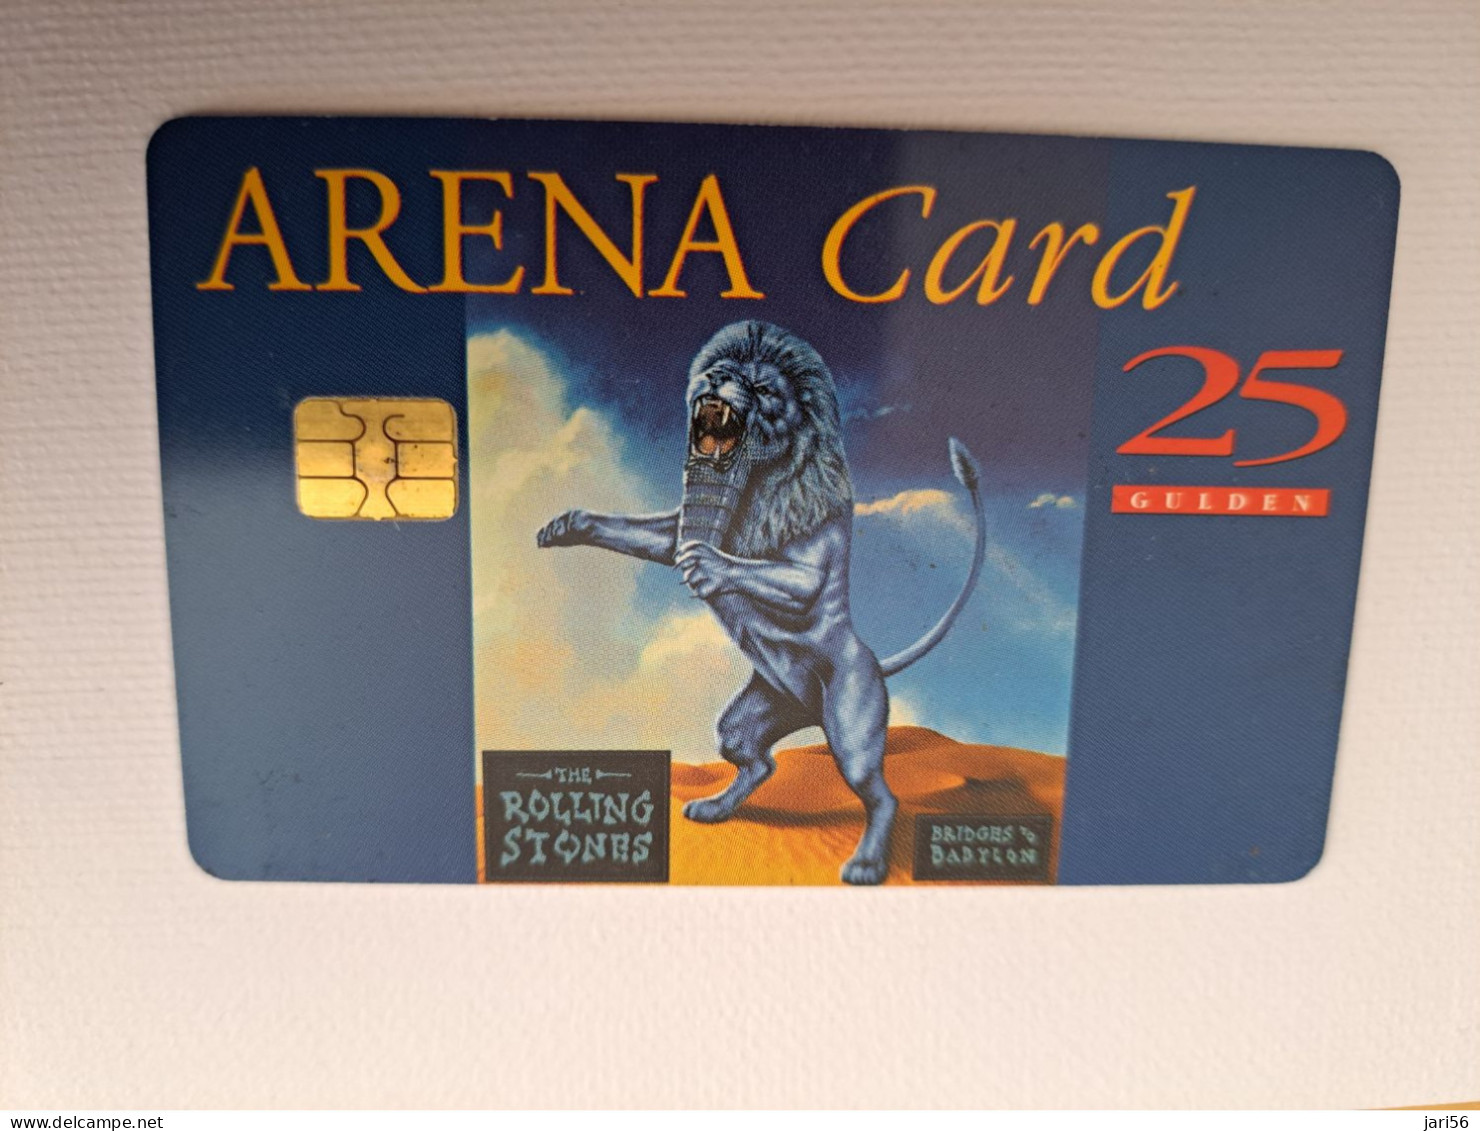 NETHERLANDS CHIPCARD / HFL 25,- ,- ARENA CARD /  ROLLING STONES  IN THE ARENA   - USED CARD  ** 13505** - Públicas